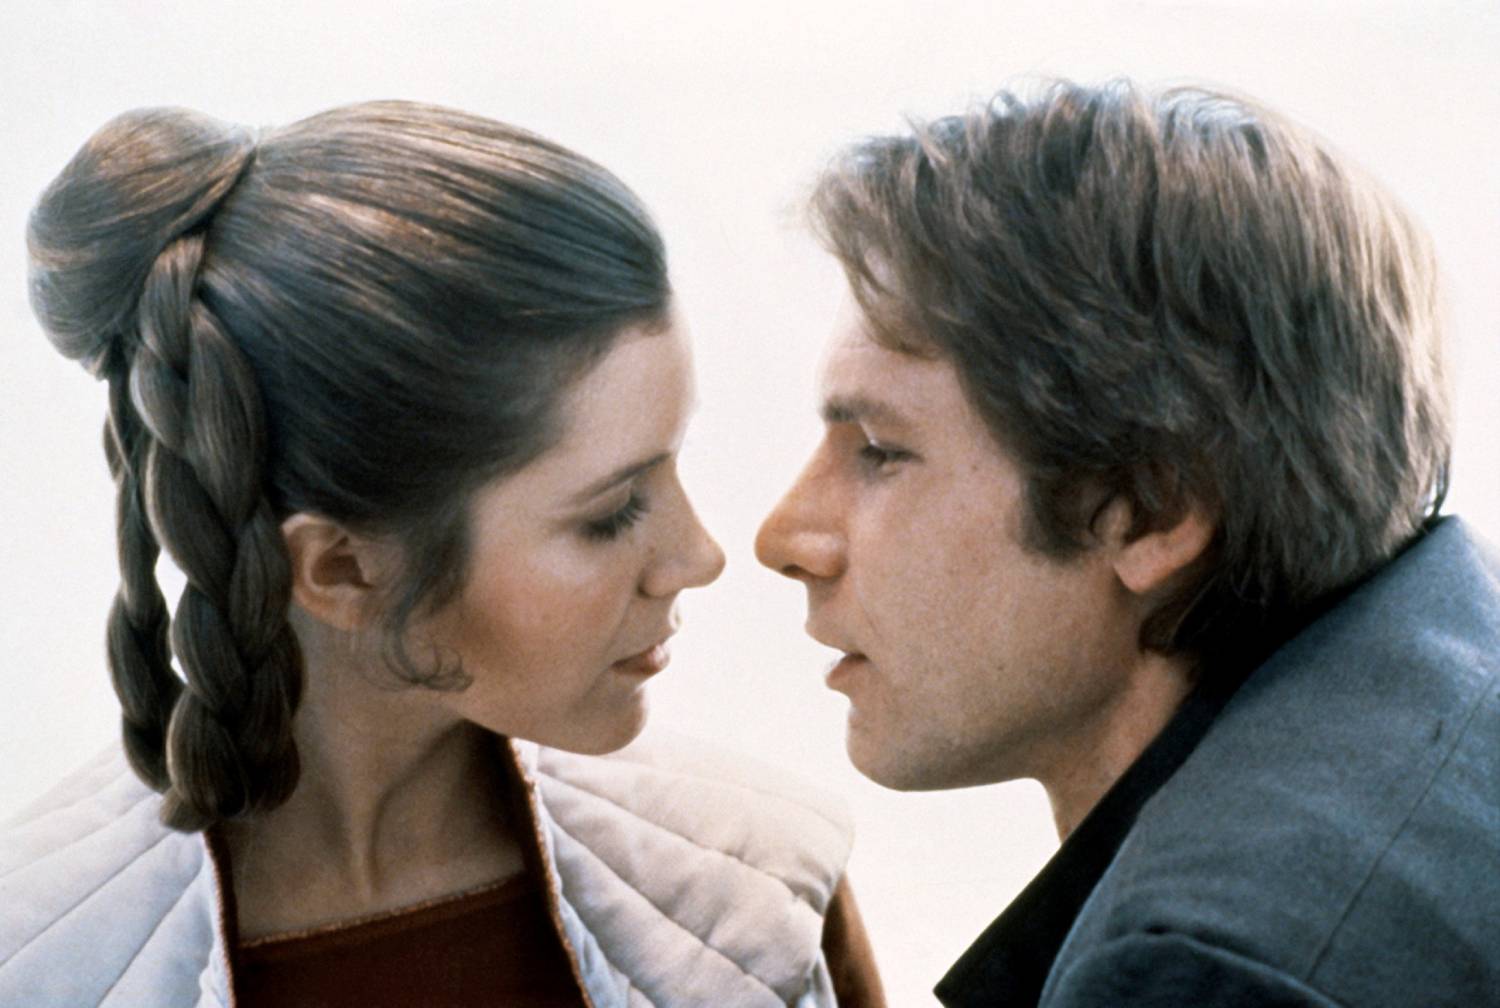 American actors Carrie Fisher and Harrison Ford on the set of Star Wars: Episode V - The Empire Strikes Back directed by Irvin Kershner.